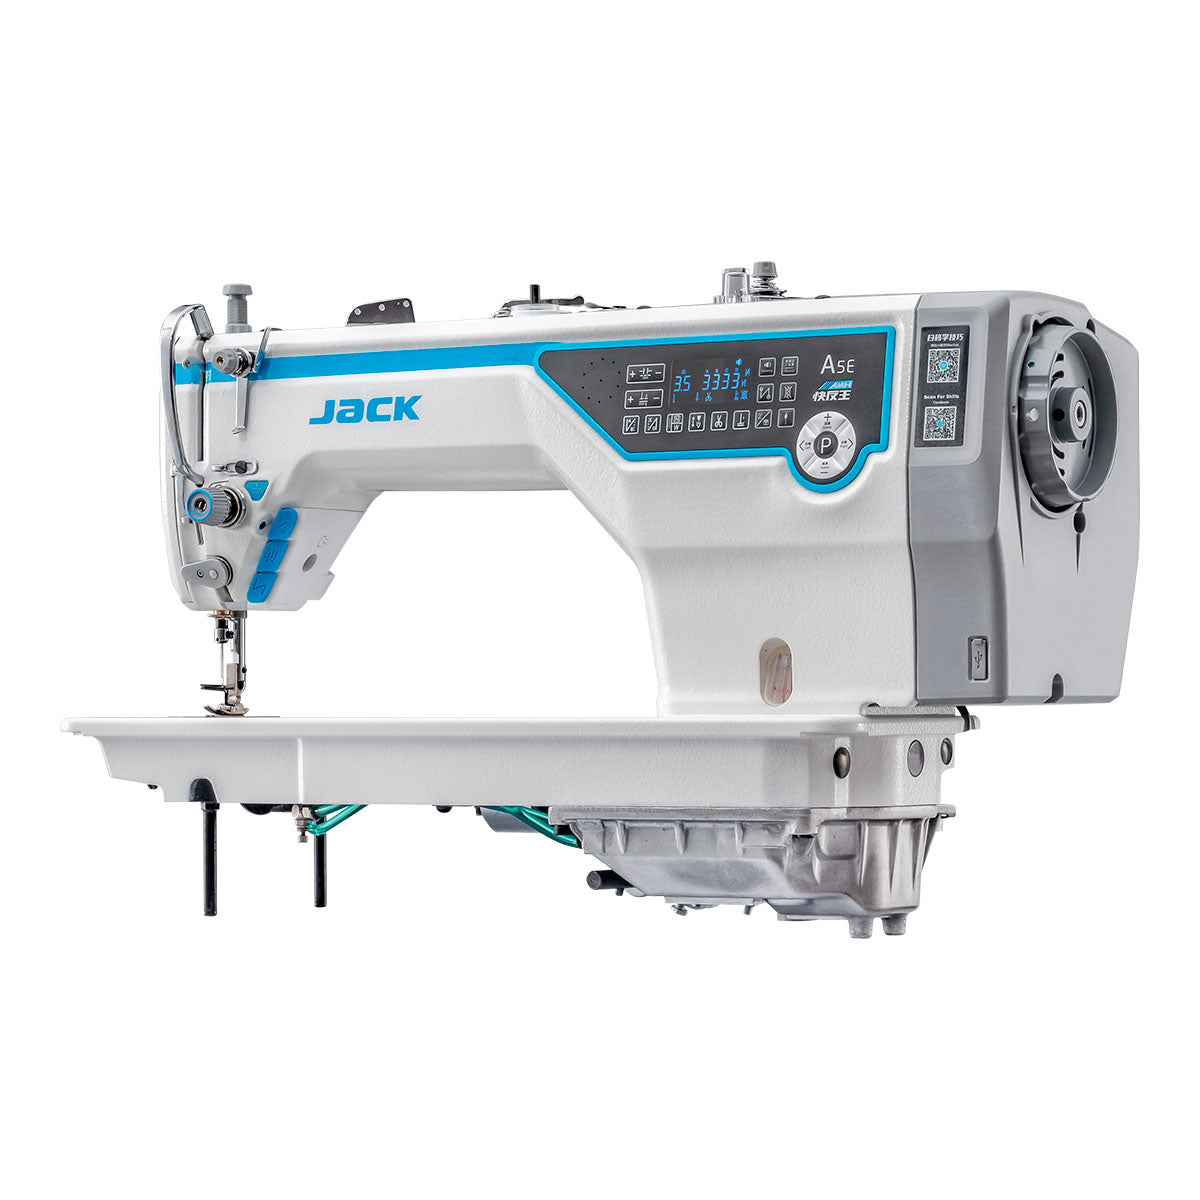 JACK A5E-A (A.M.H) AI Material Recognition Unlock the Potential of All Fabrics Single Needle Direct Drive Fully Automatic Drop Feed Lockstitch Industrial Sewing Machine Complete Assembled with Table and Stand Included